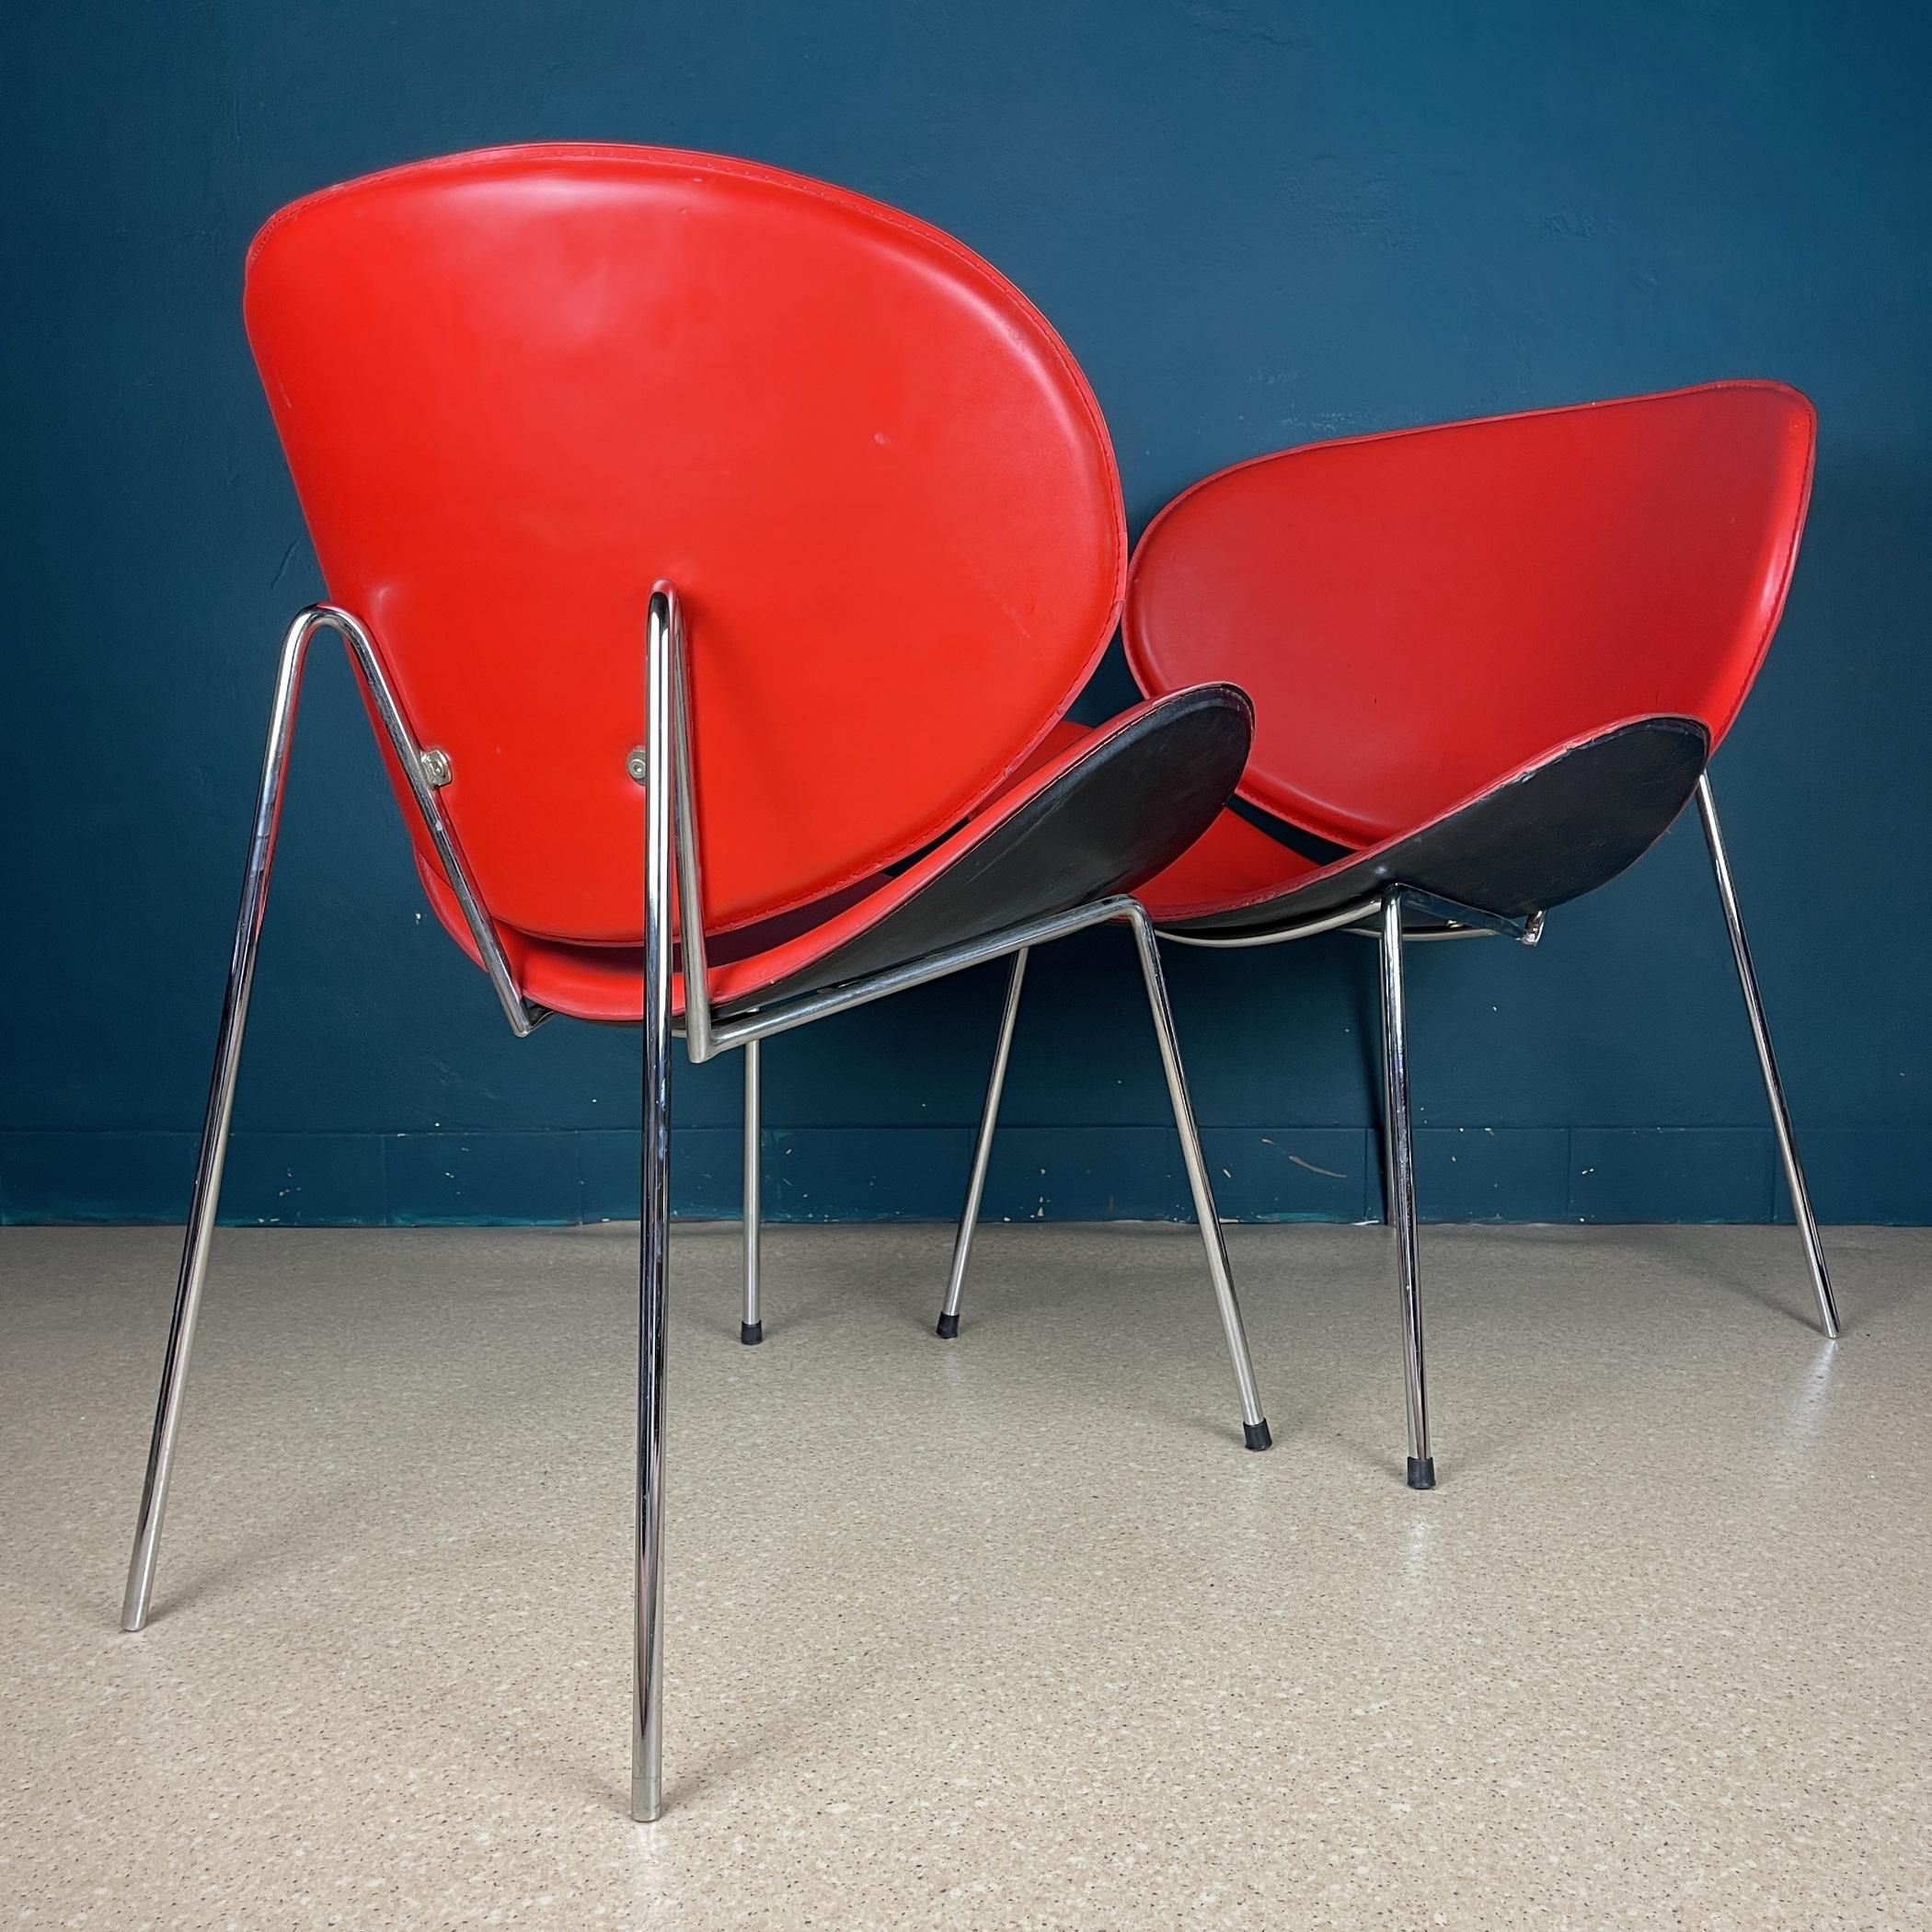 Metal Pair of red lounge chairs Italy 1990s Design Pierre Paulin Style For Sale